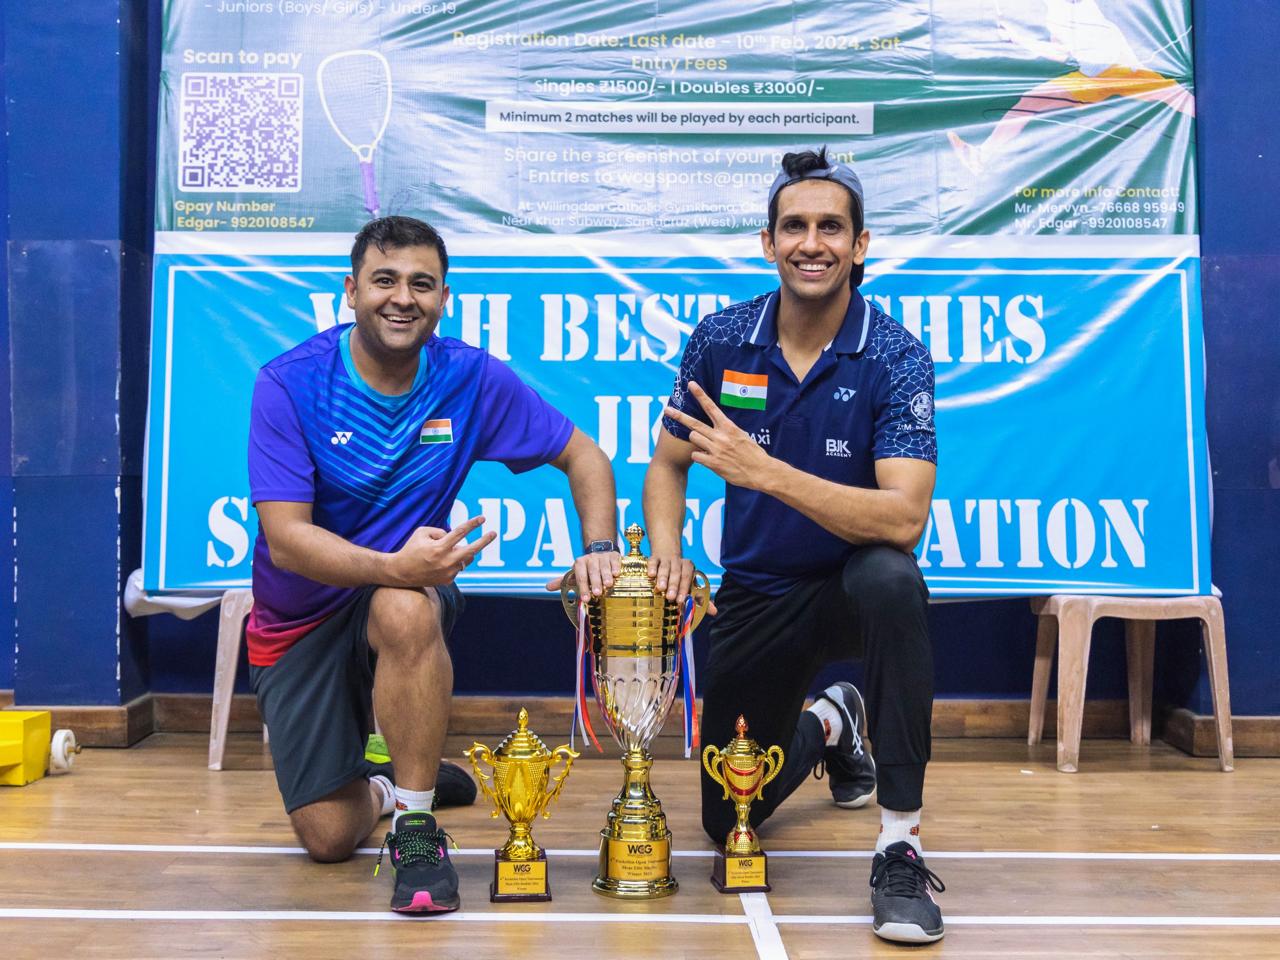 Nikhil Mansukhani and Siddharth Nandal both won double crowns at the recently conducted Racketlon All India Open Championships.